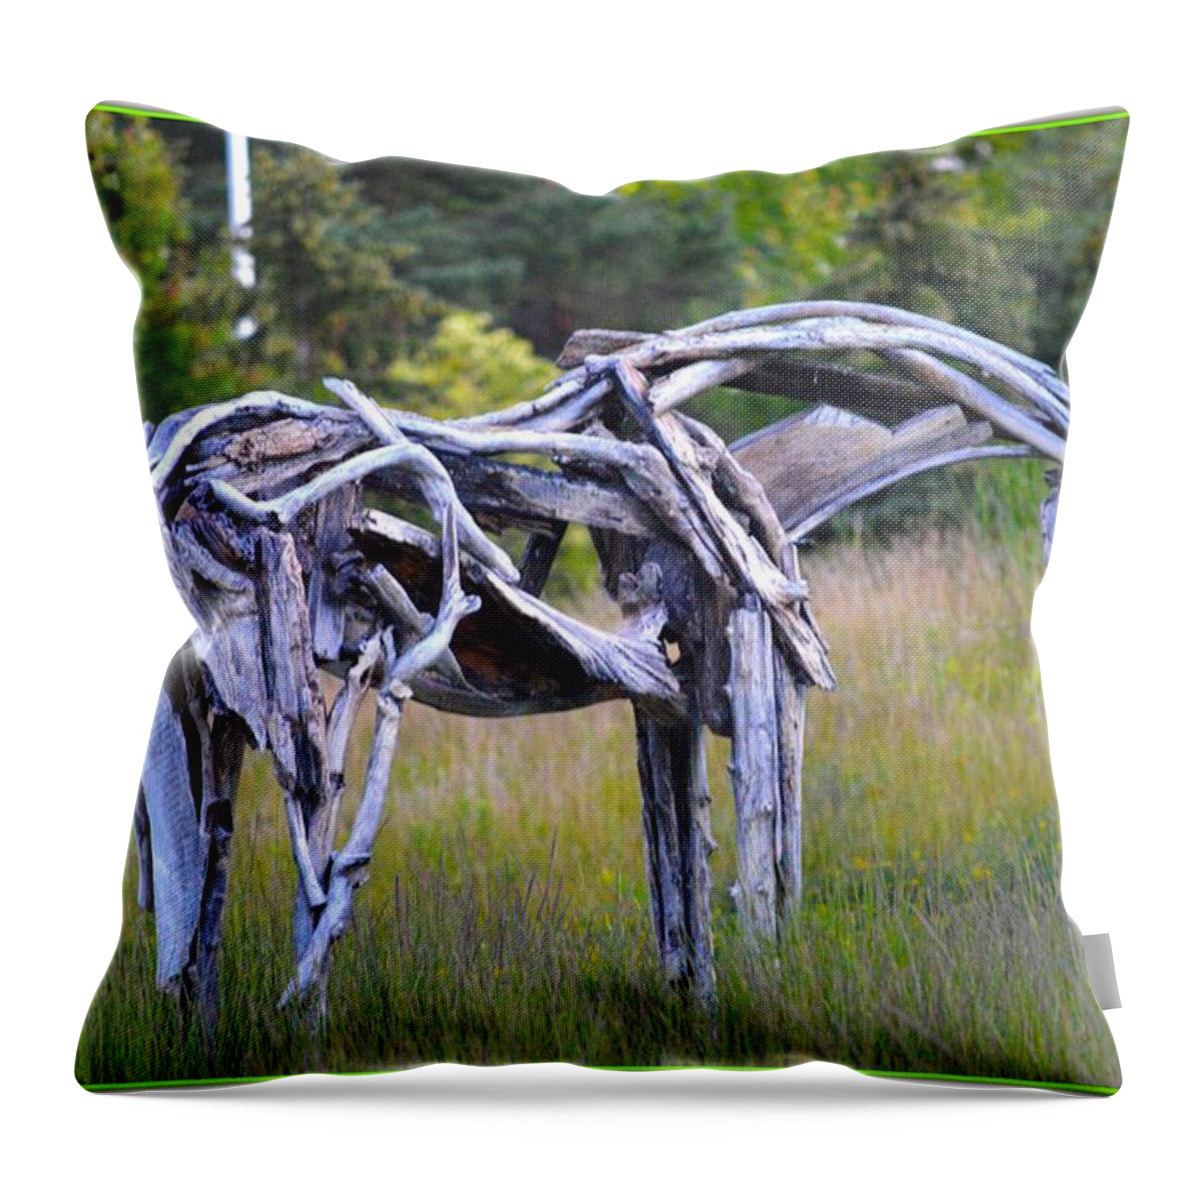 Art For Condo Throw Pillow featuring the photograph Sculpture of Horse by Sonali Gangane